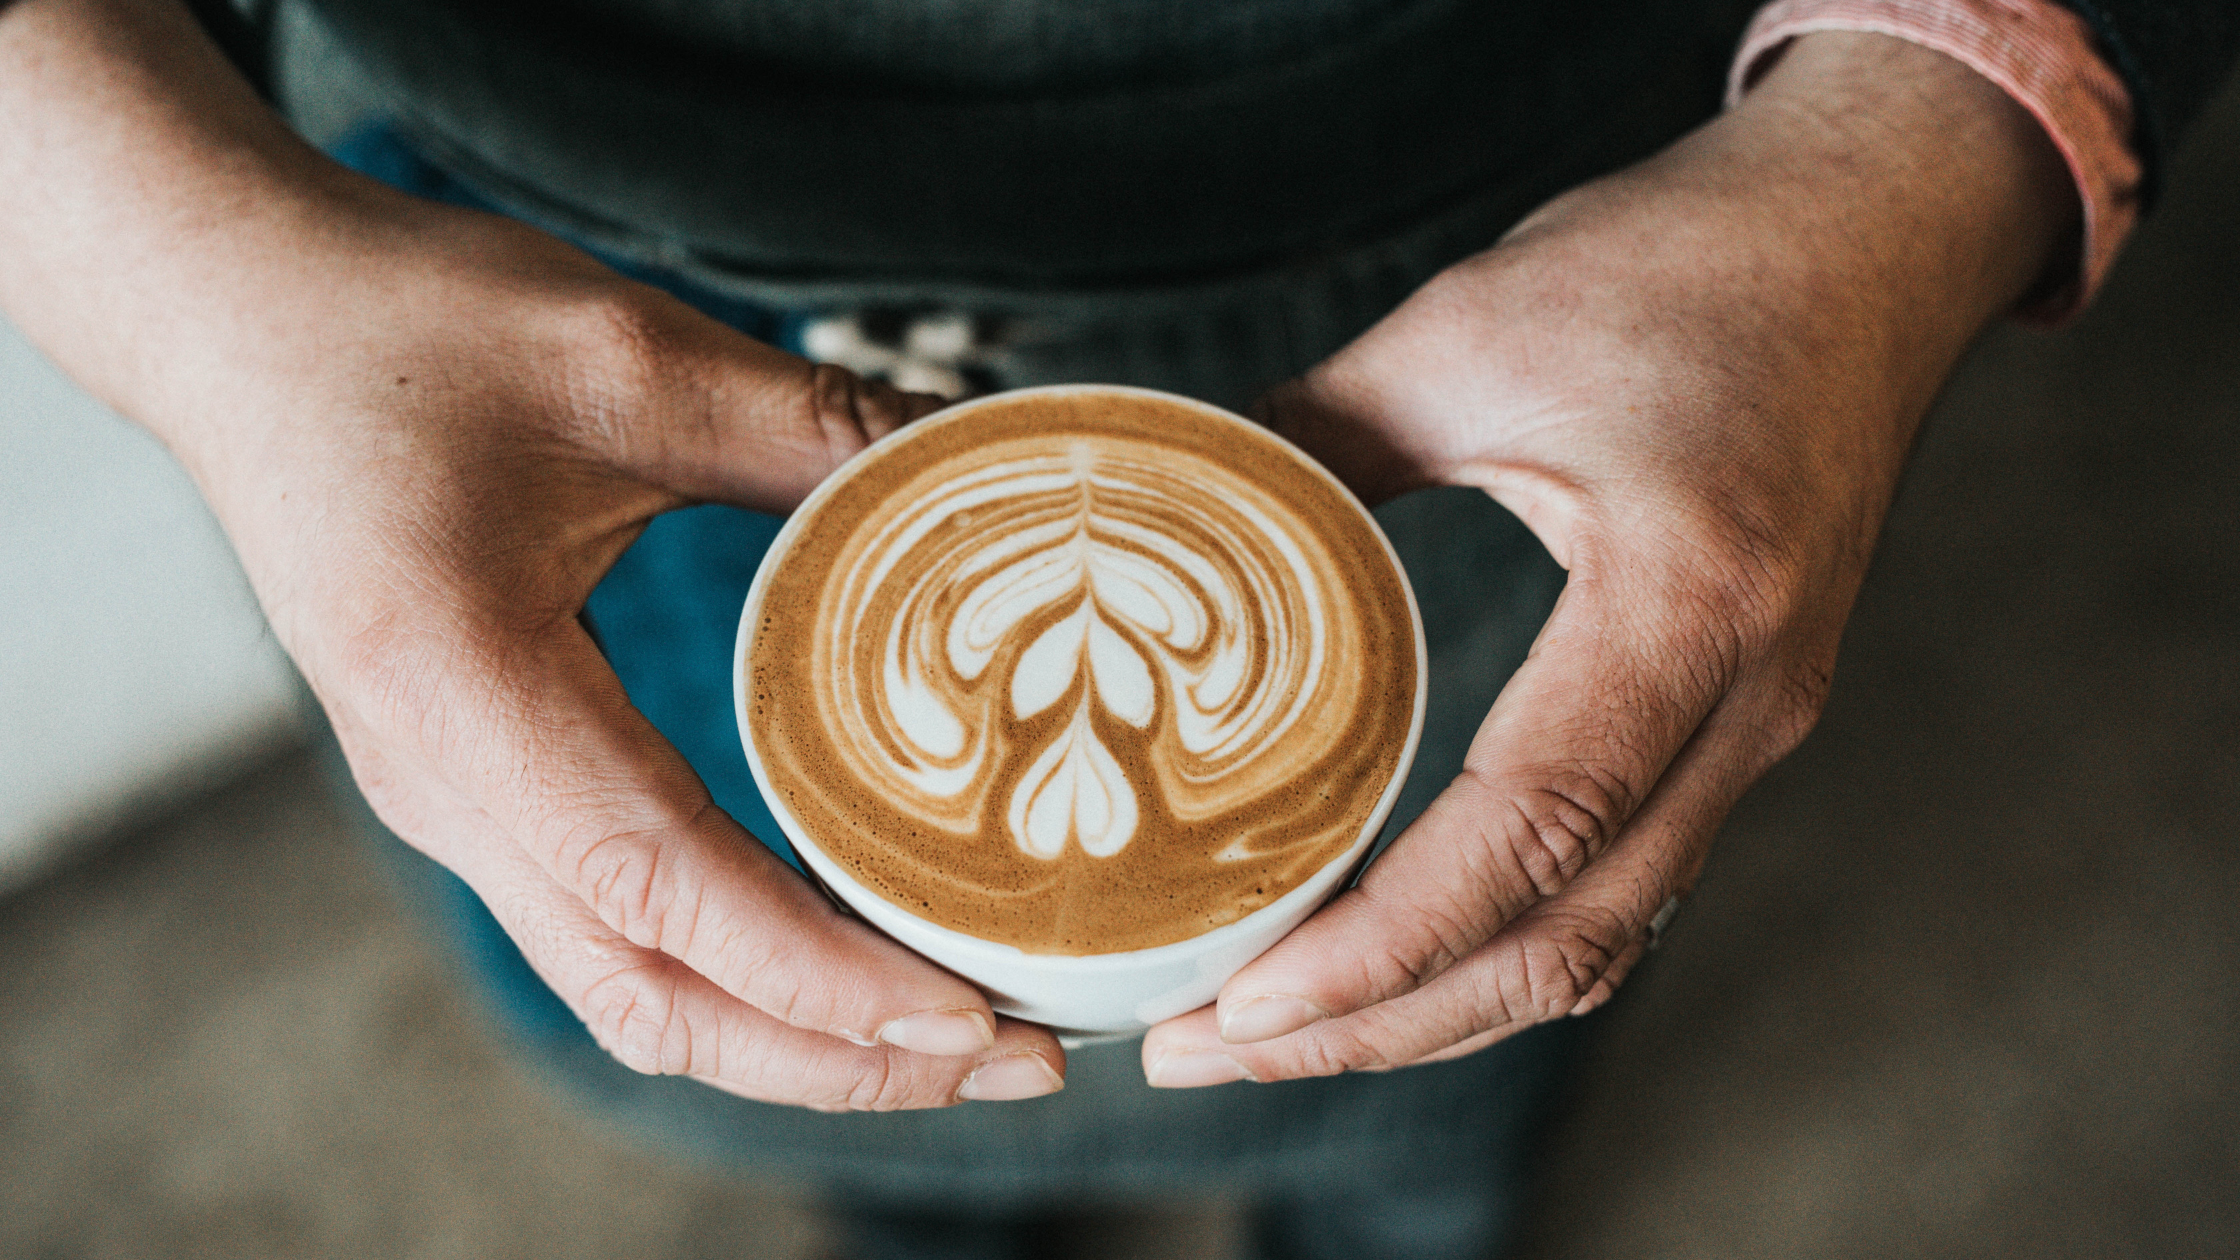 10 Coffee Shops to Experience in Waco, Texas